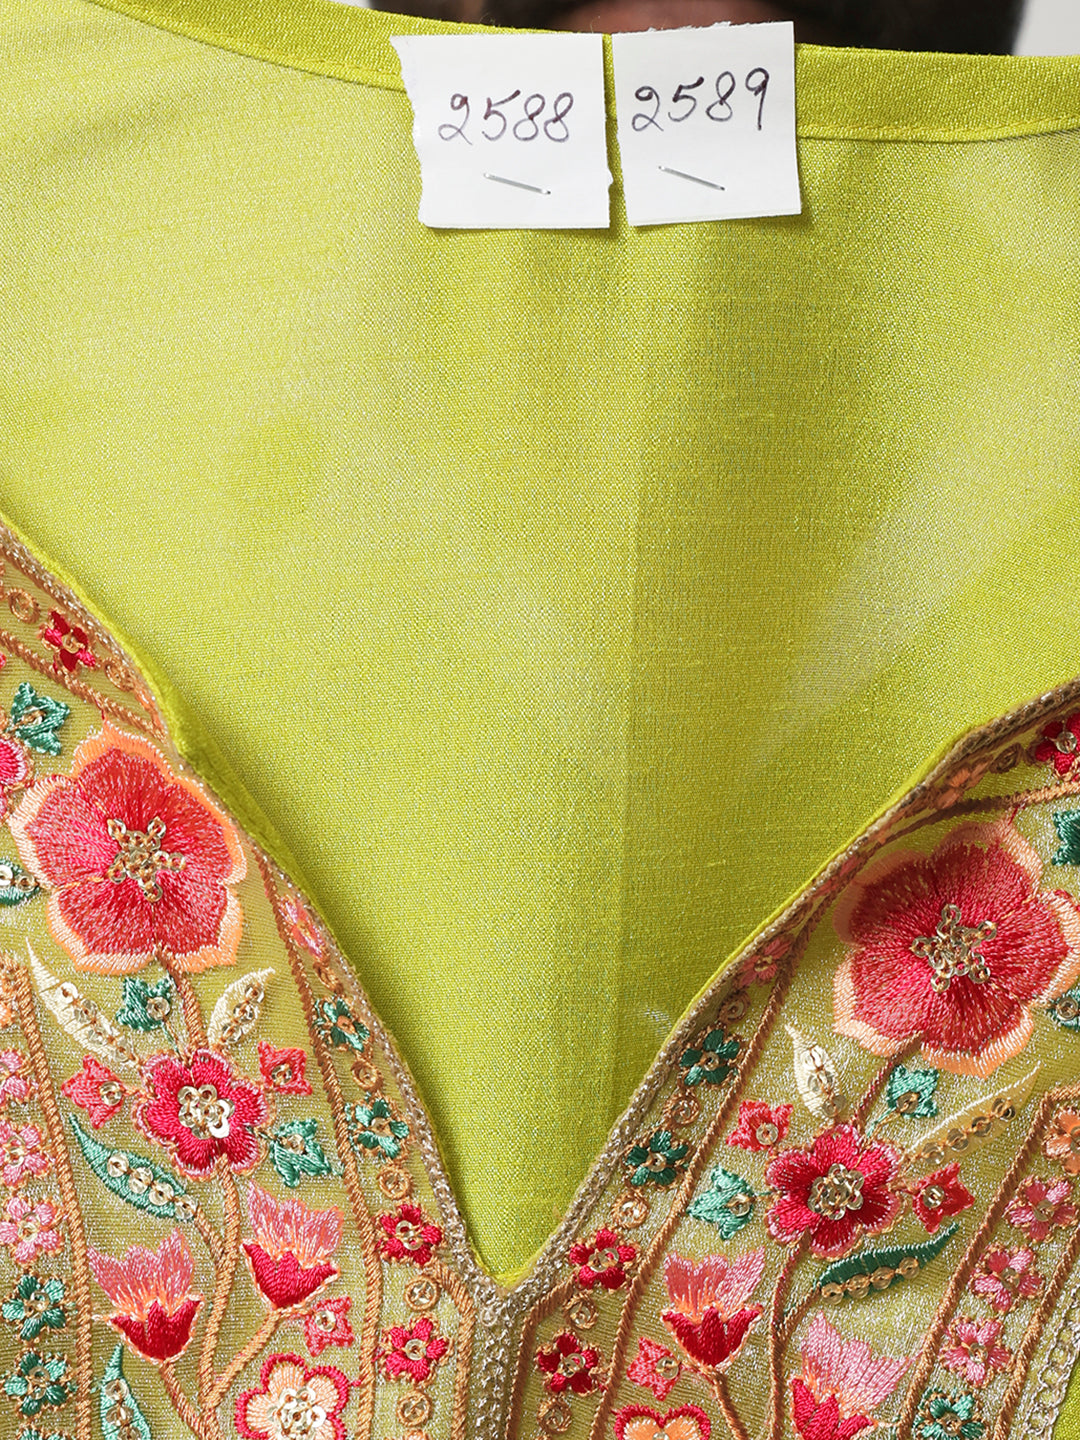 Women's Lime Green Floral Embroidered Kurti With Straight Pants - Anokherang